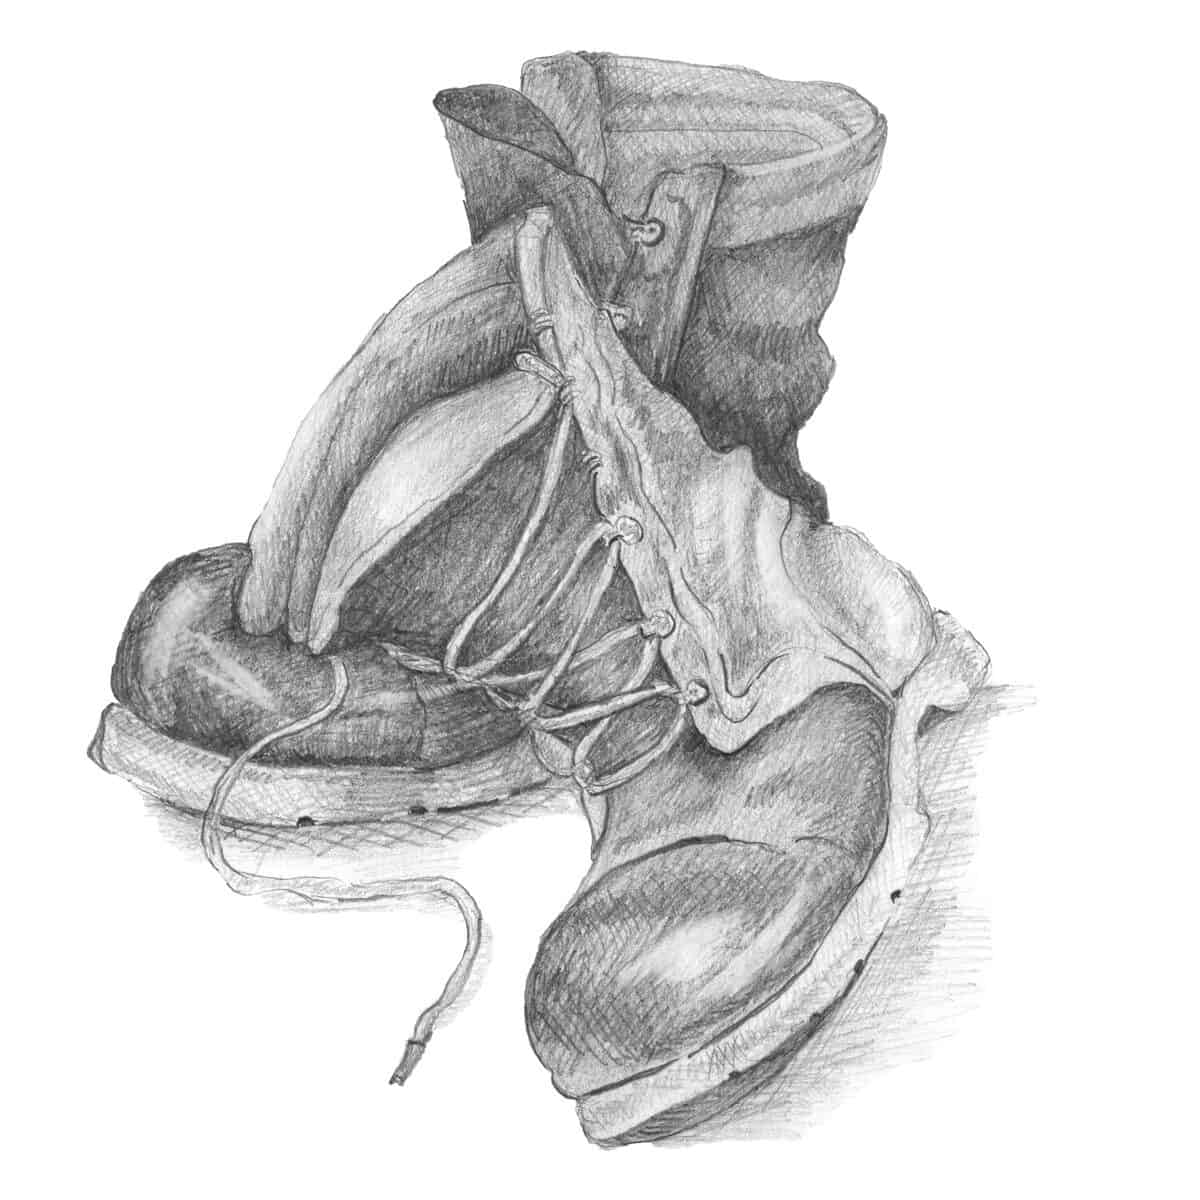 a shaded pencil drawing of worn boots.